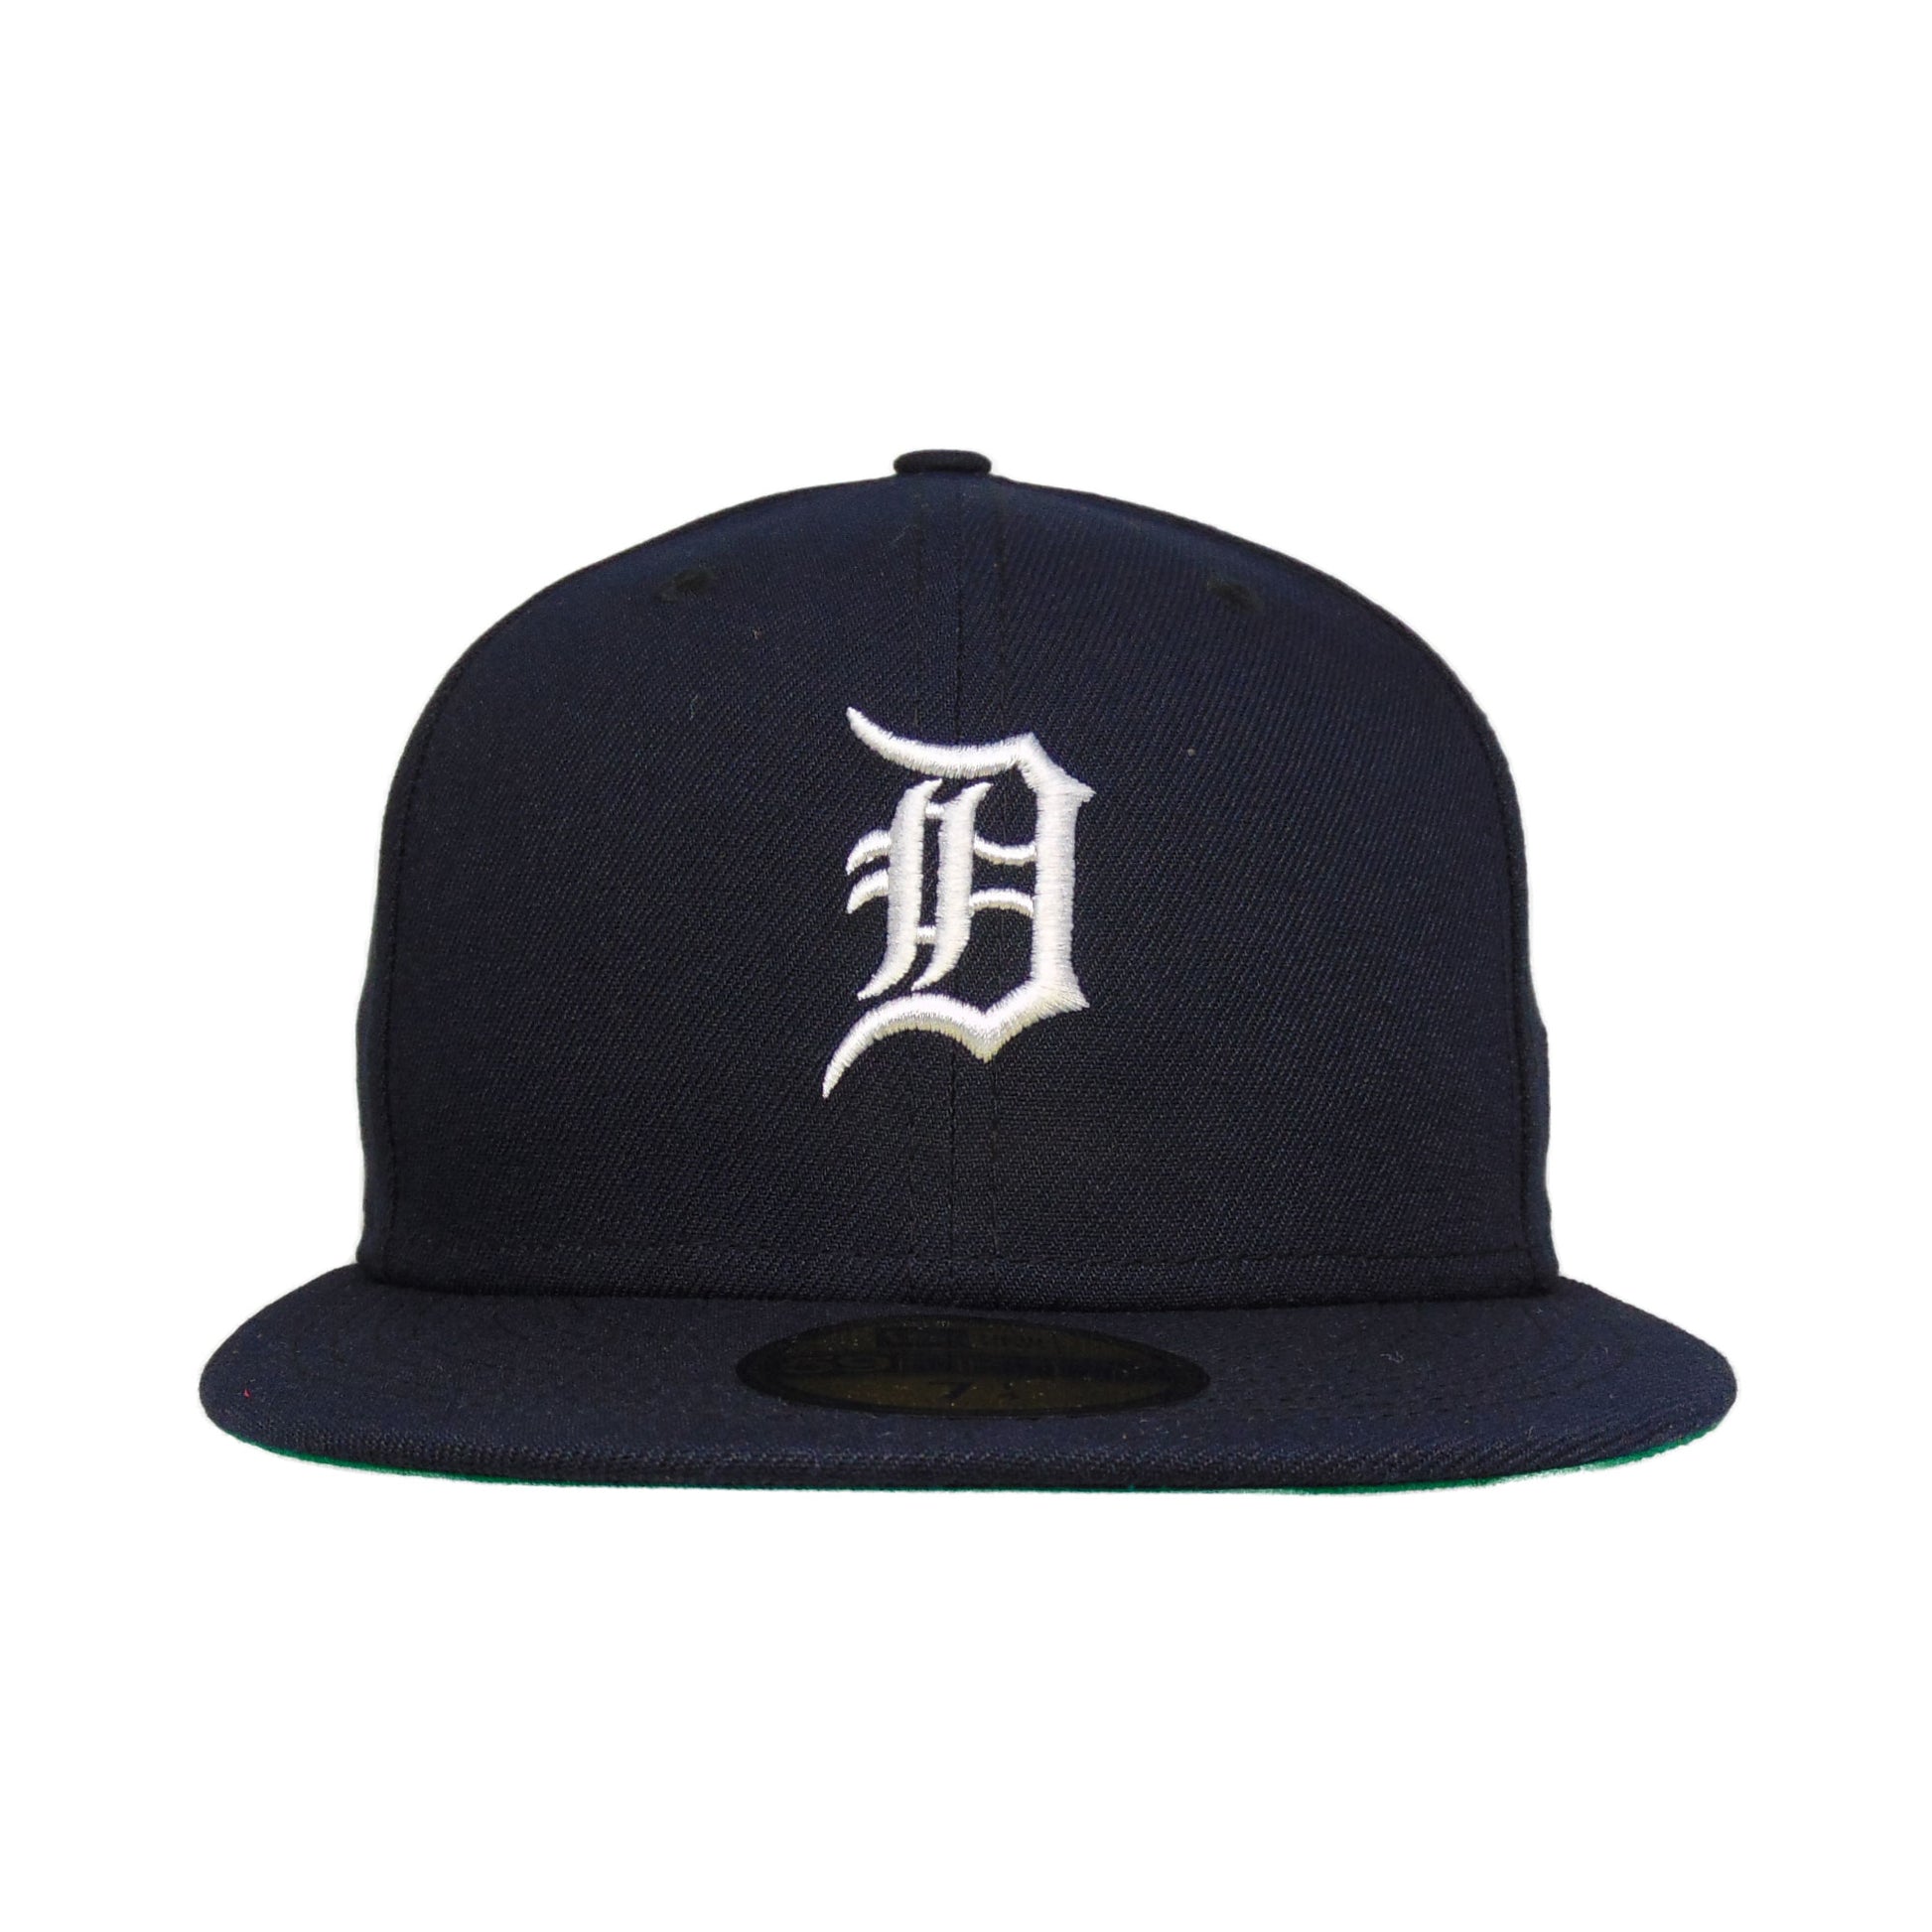 vintage new era fitted hat usa detroit tigers size 6 7/8